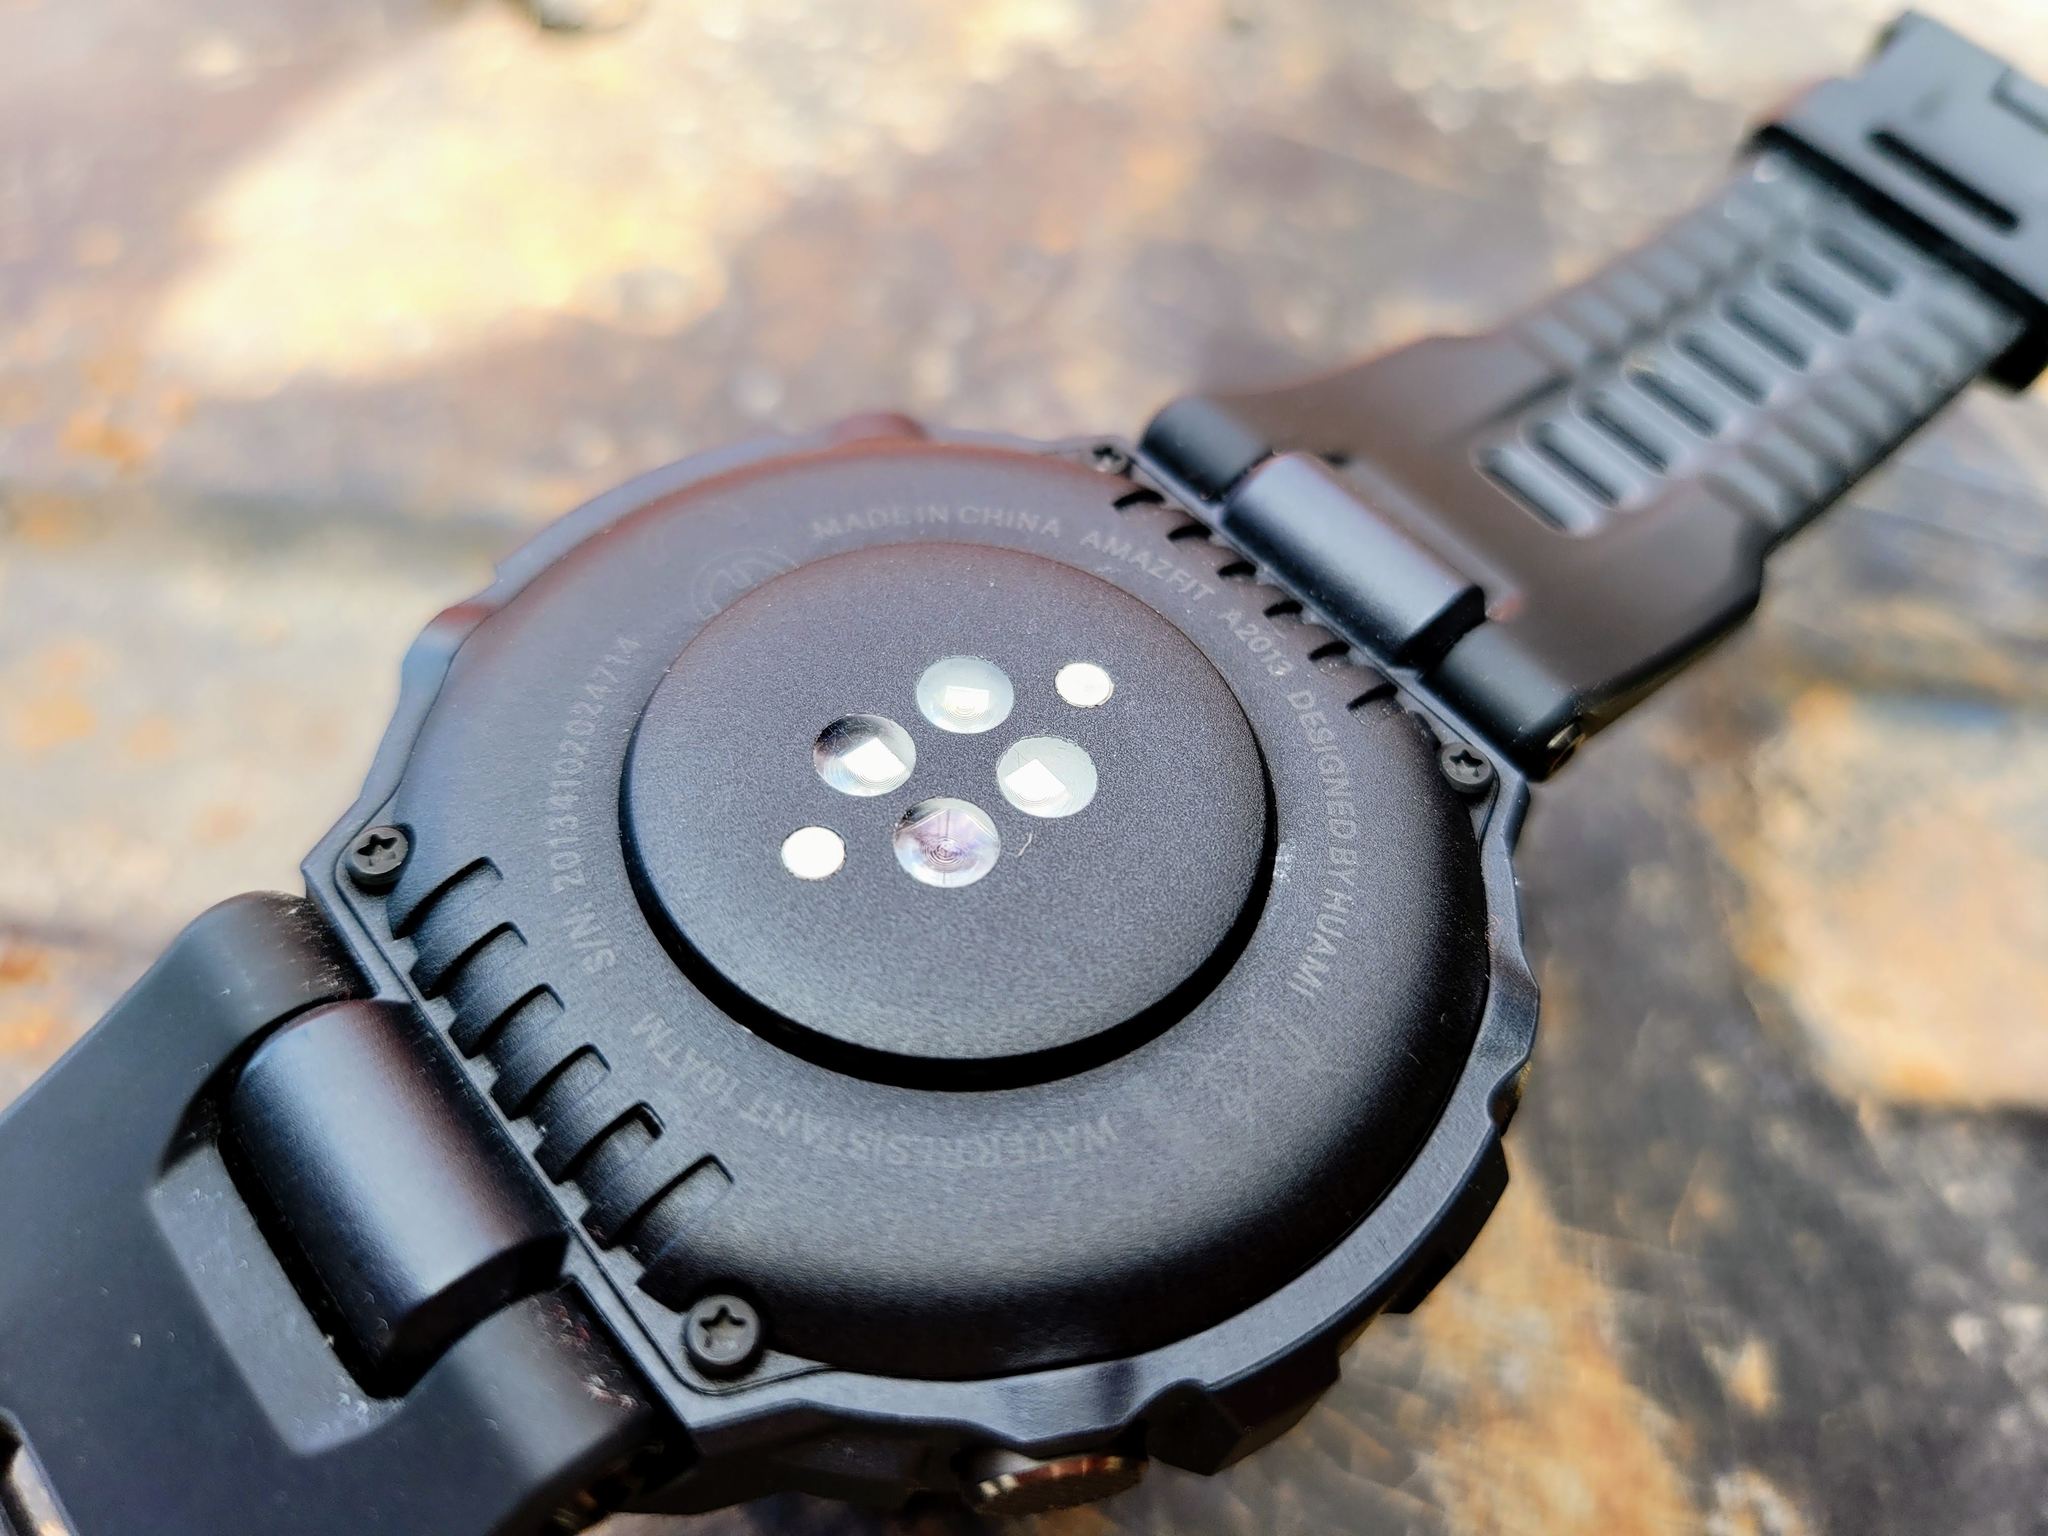 Mike Adams Live: Review: The Amazfit T-Rex Pro is so close to